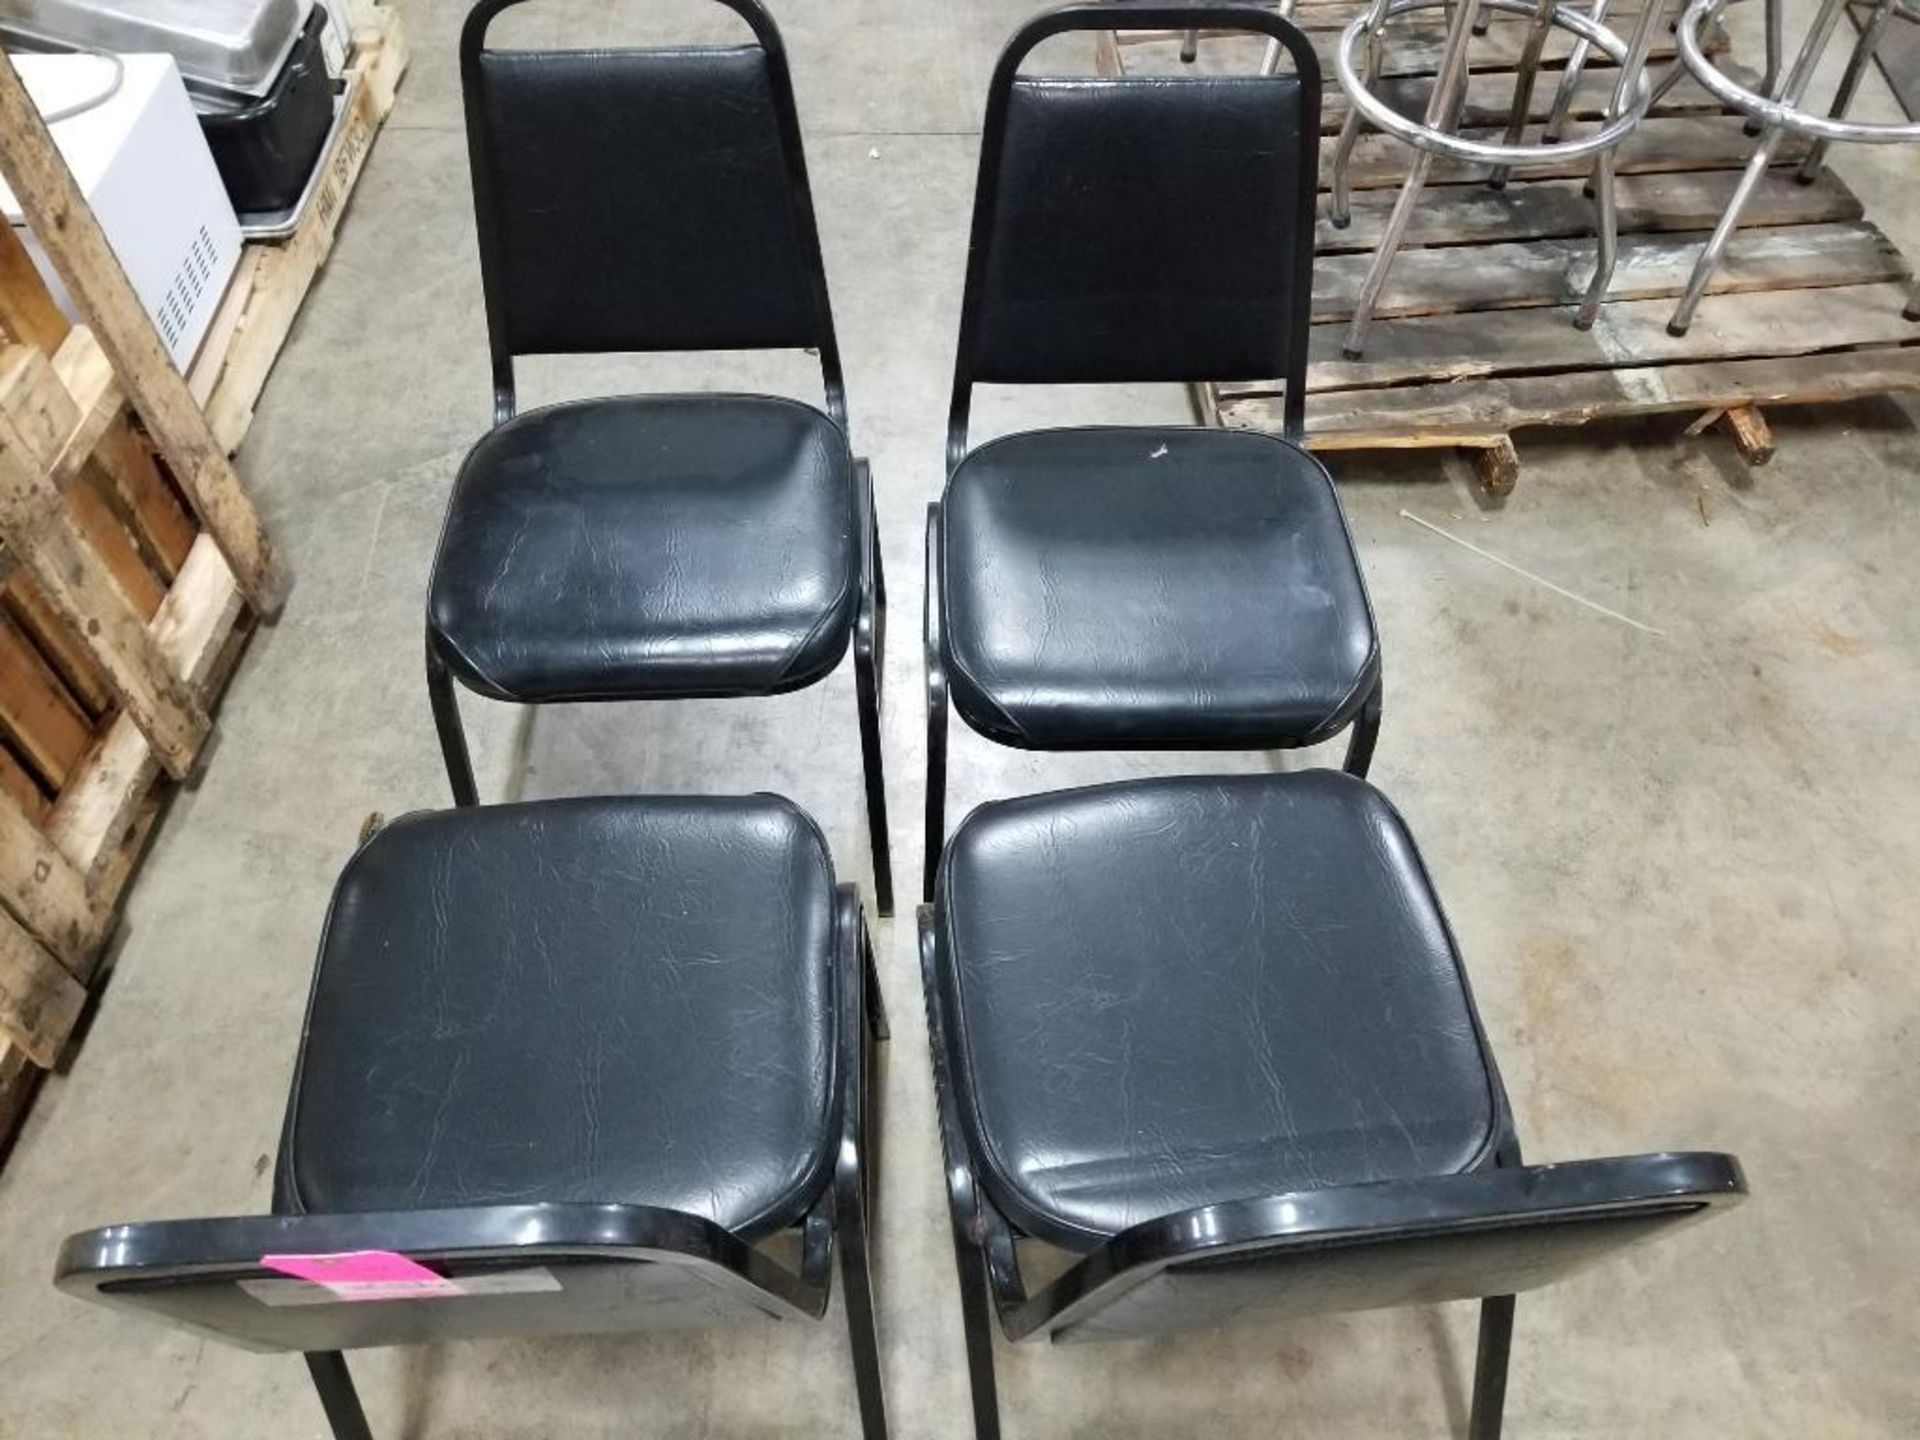 4 chairs.